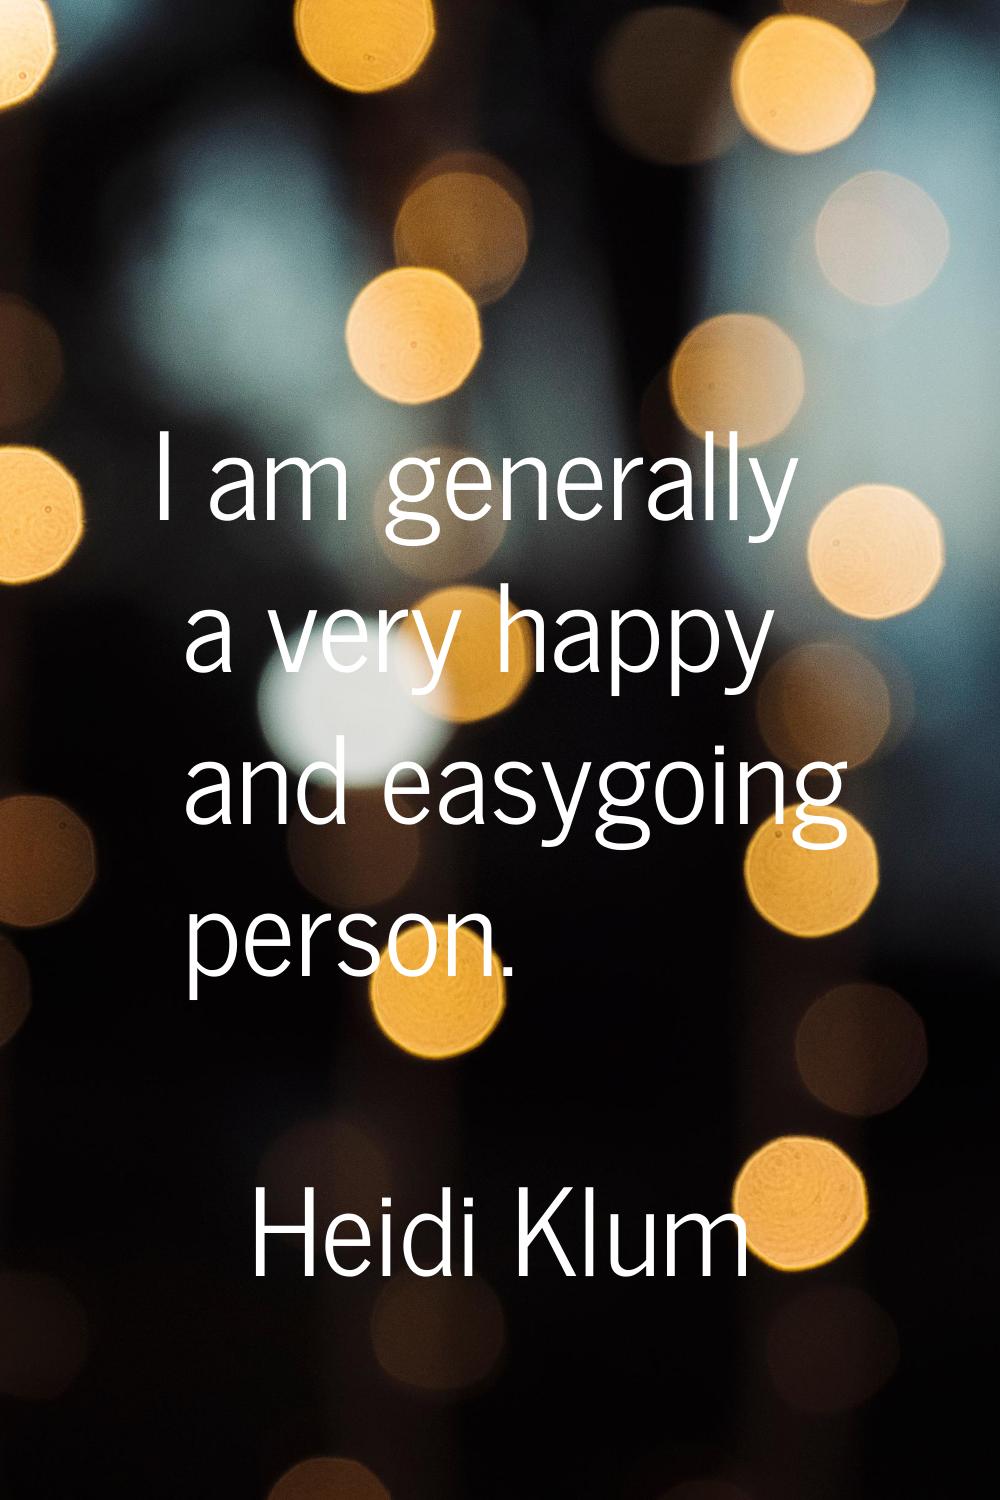 I am generally a very happy and easygoing person.